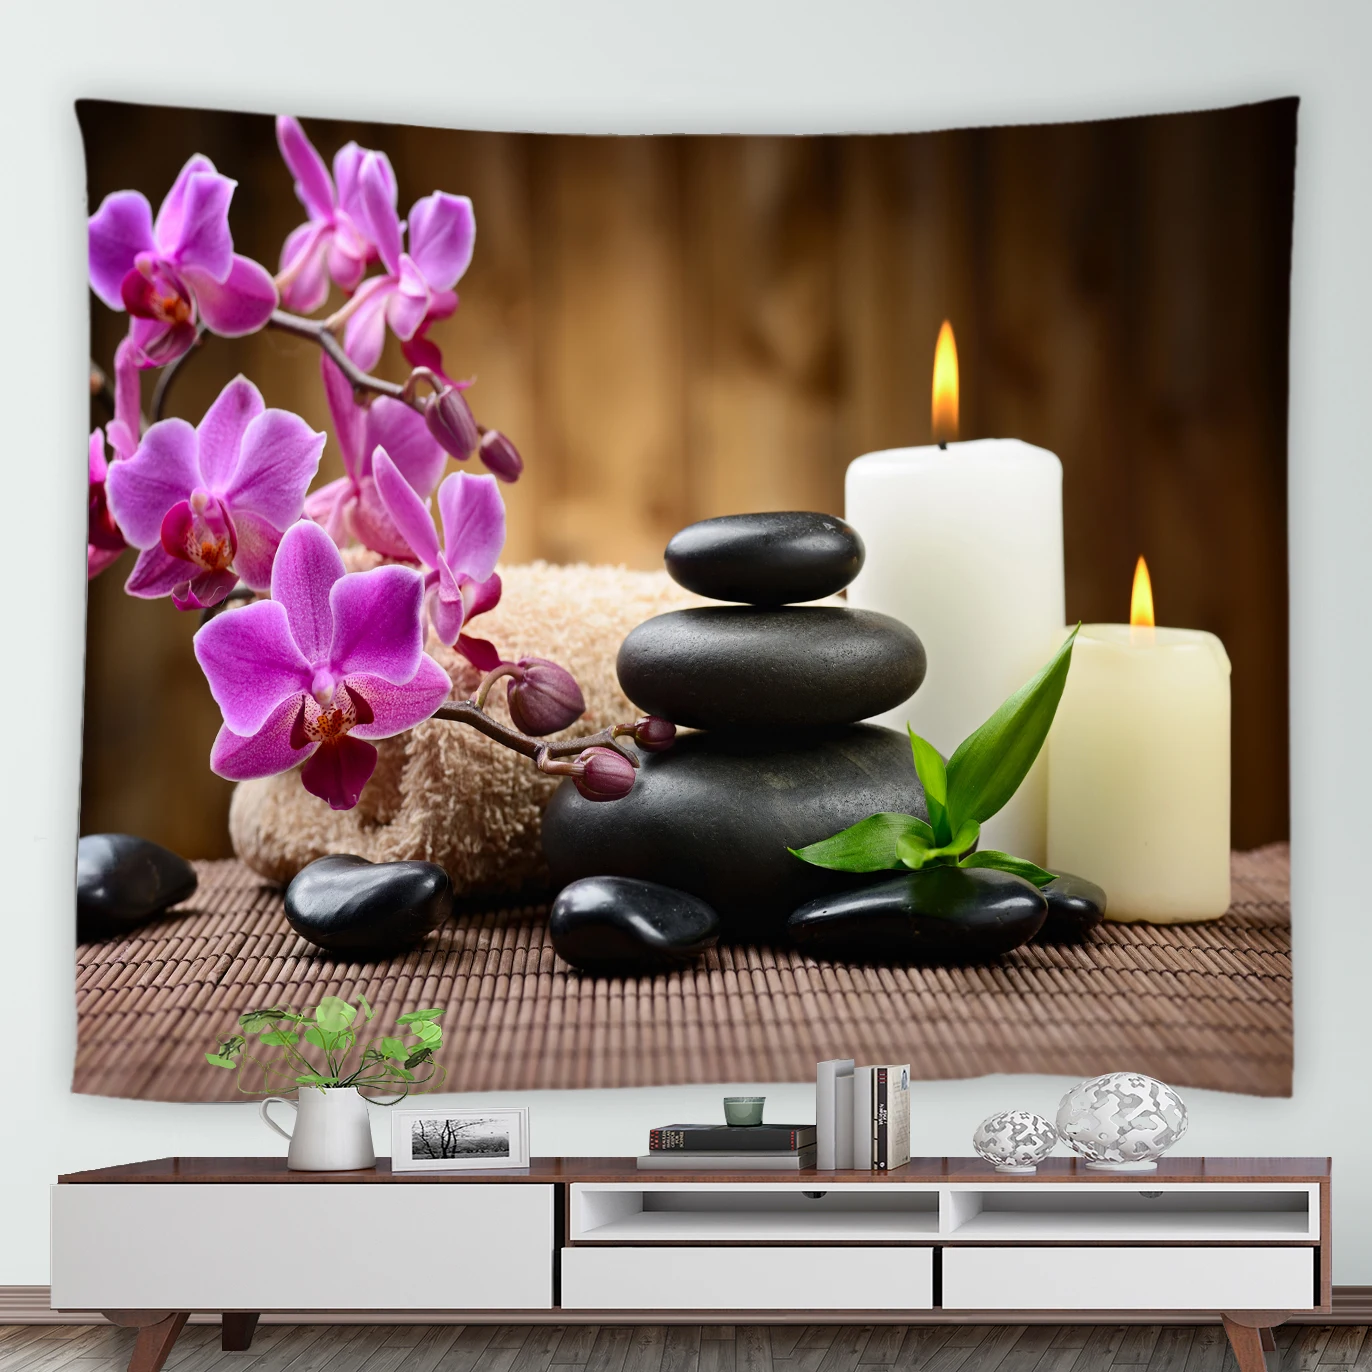 https://ae01.alicdn.com/kf/H4f4a6f9020744df5a23adc32b81447c7b/Candle-Purple-Orchid-Green-Bamboo-Tapestry-Zen-Spa-Garden-Scenery-Wall-Hanging-Home-Landscape-Tapestries-Mural.jpg